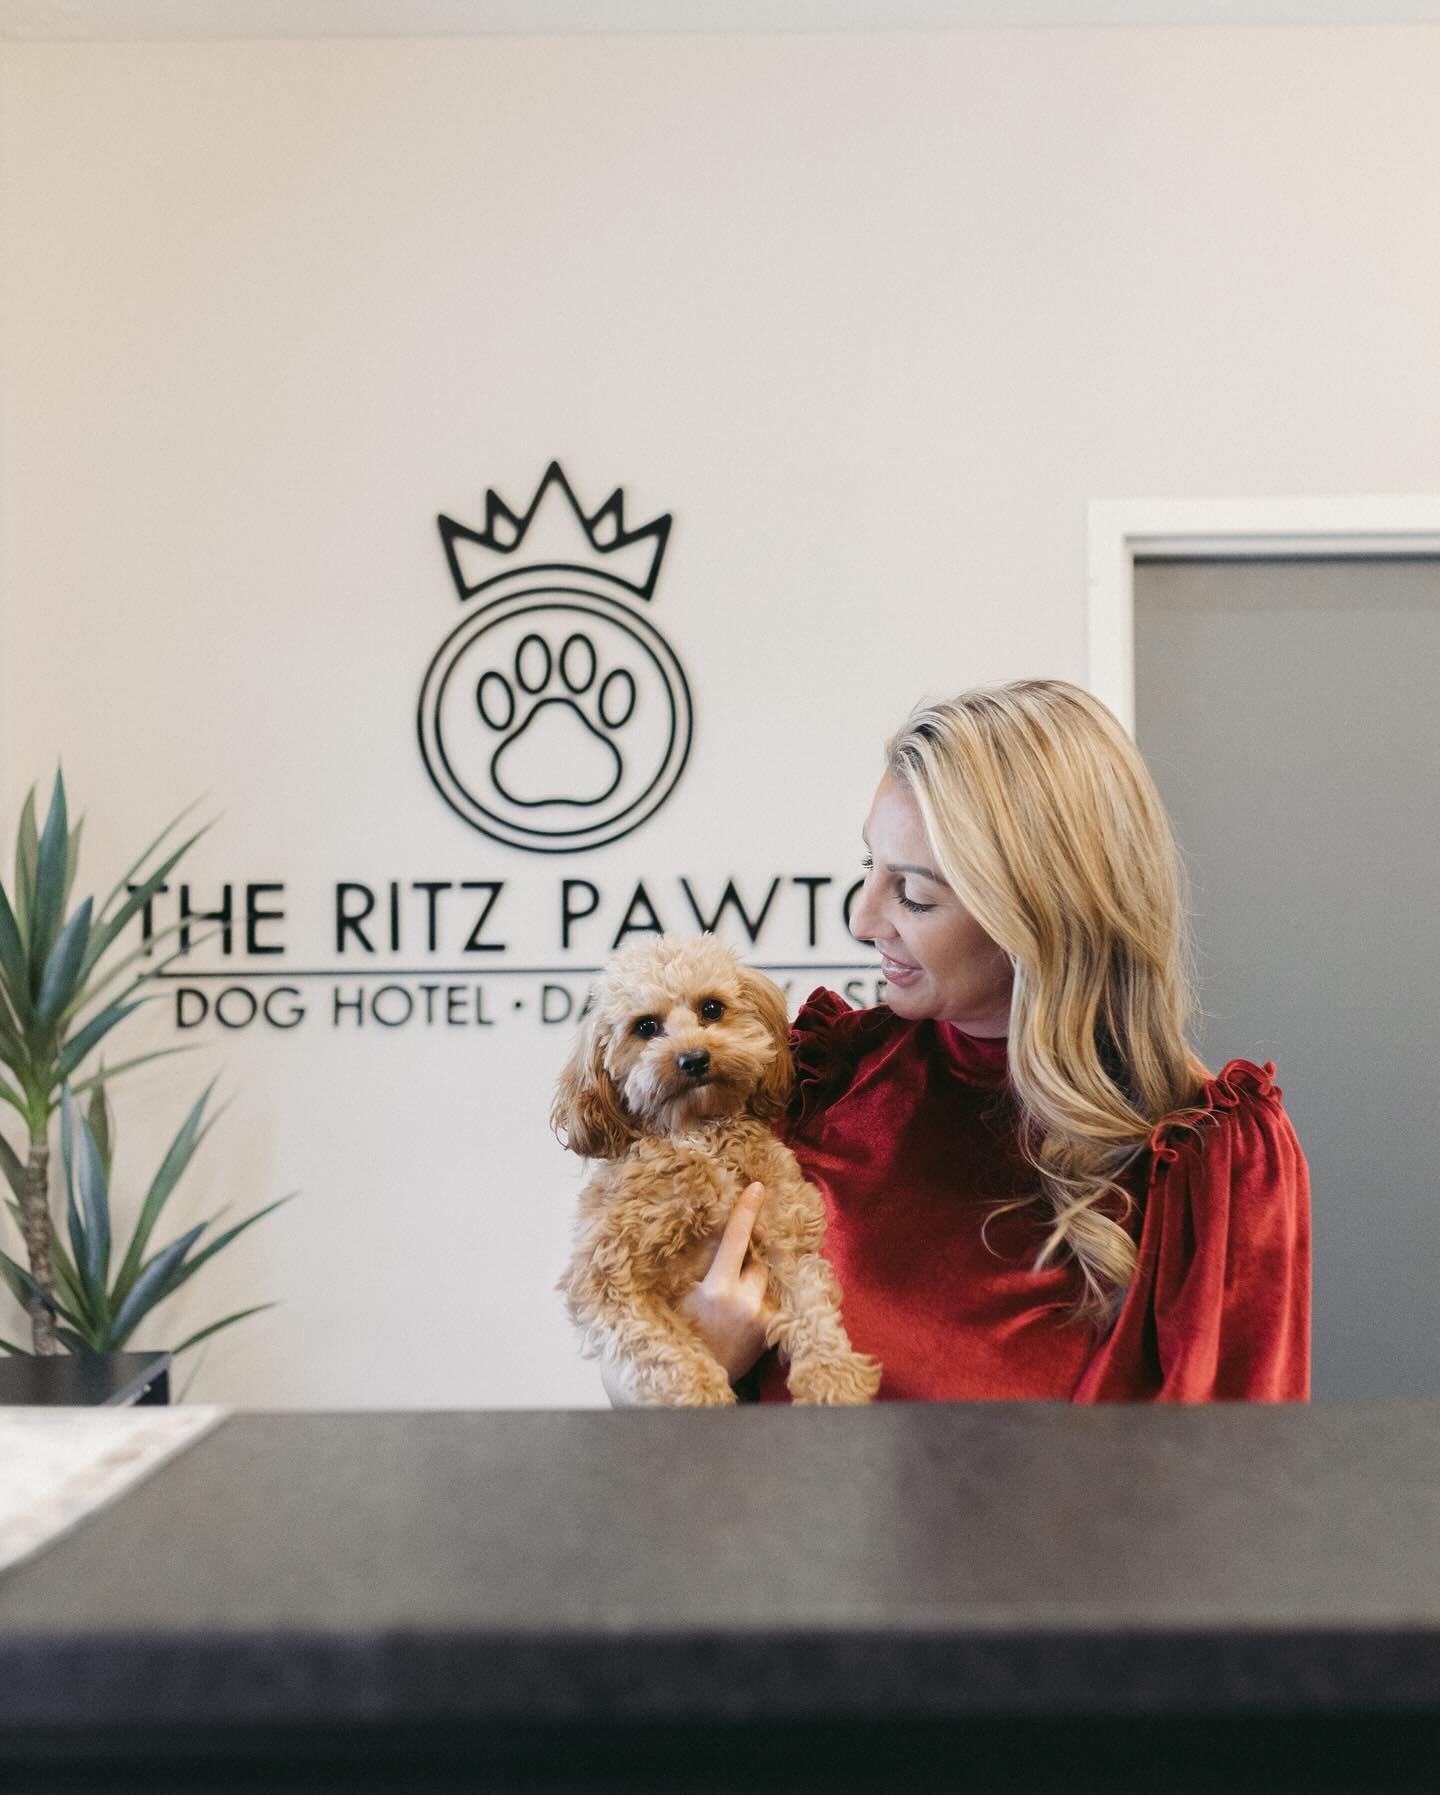 Happy National Dog Mom Day to all the amazing dog moms out there! Share your favorite dog mom moments with us for a chance to be featured. 🐾🐾

#nationaldogmomday #theritzpawton #northaugusta #luxurydogspa